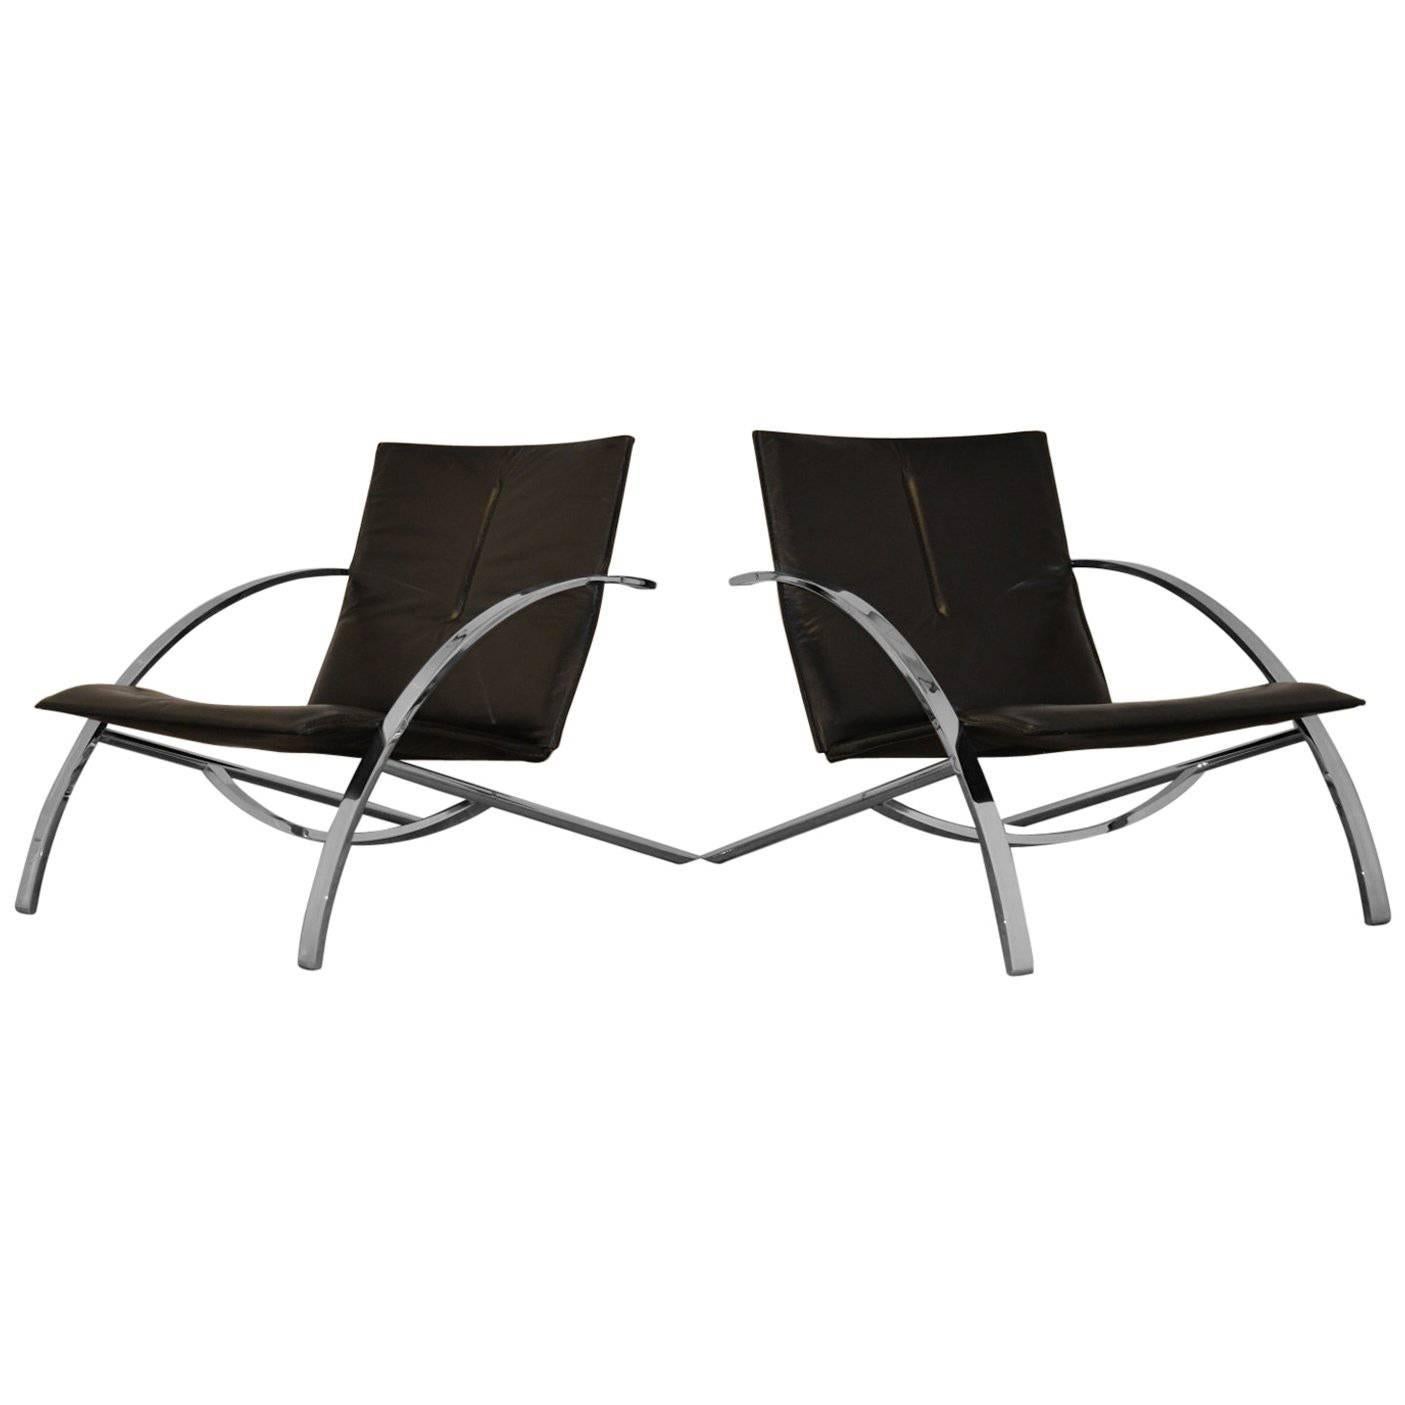 Paul Tuttle Arco Lounge Chairs for Strässle of Switzerland, 1970s For Sale